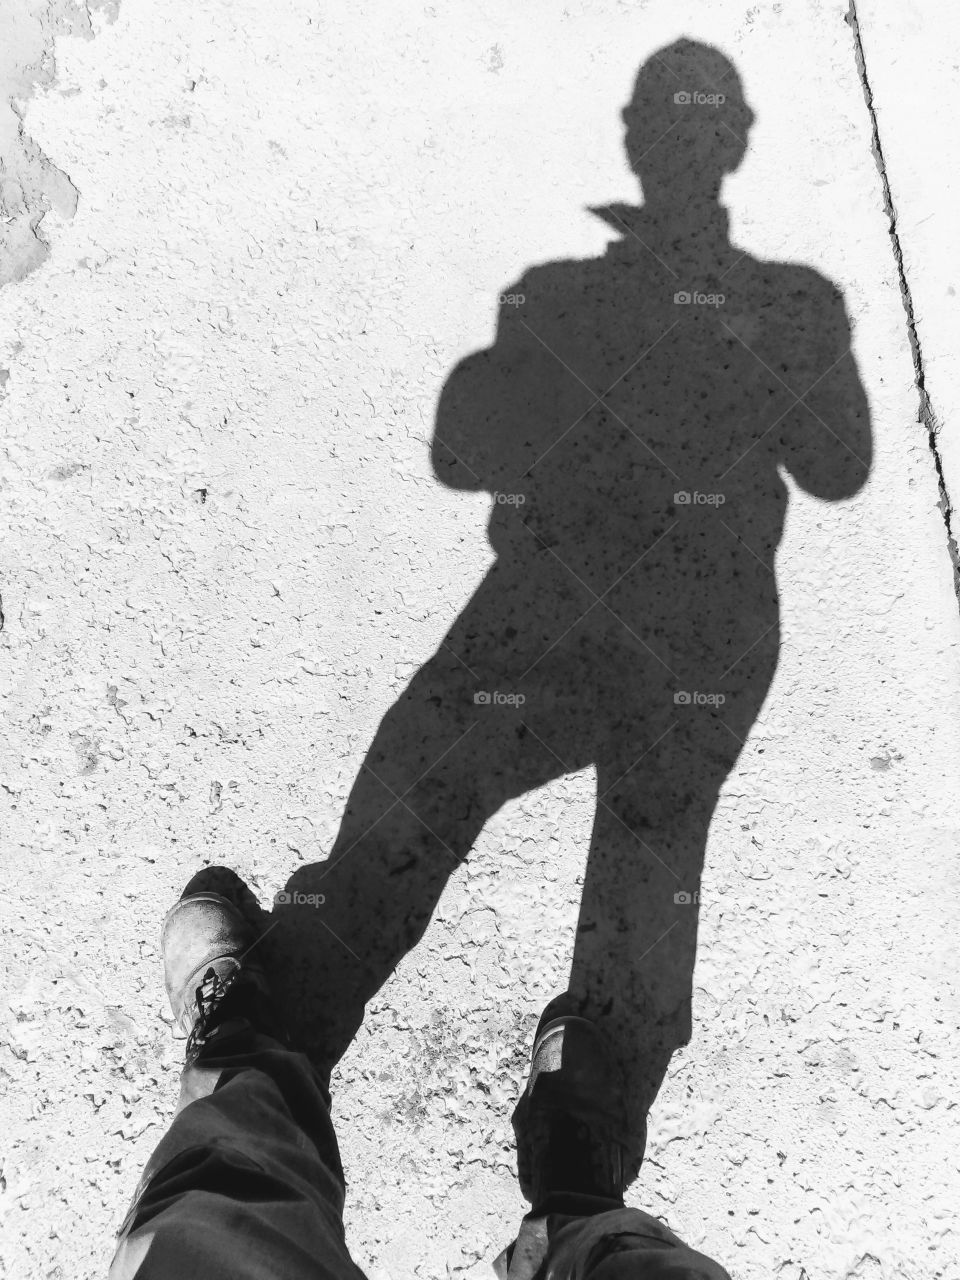 A shadow of me